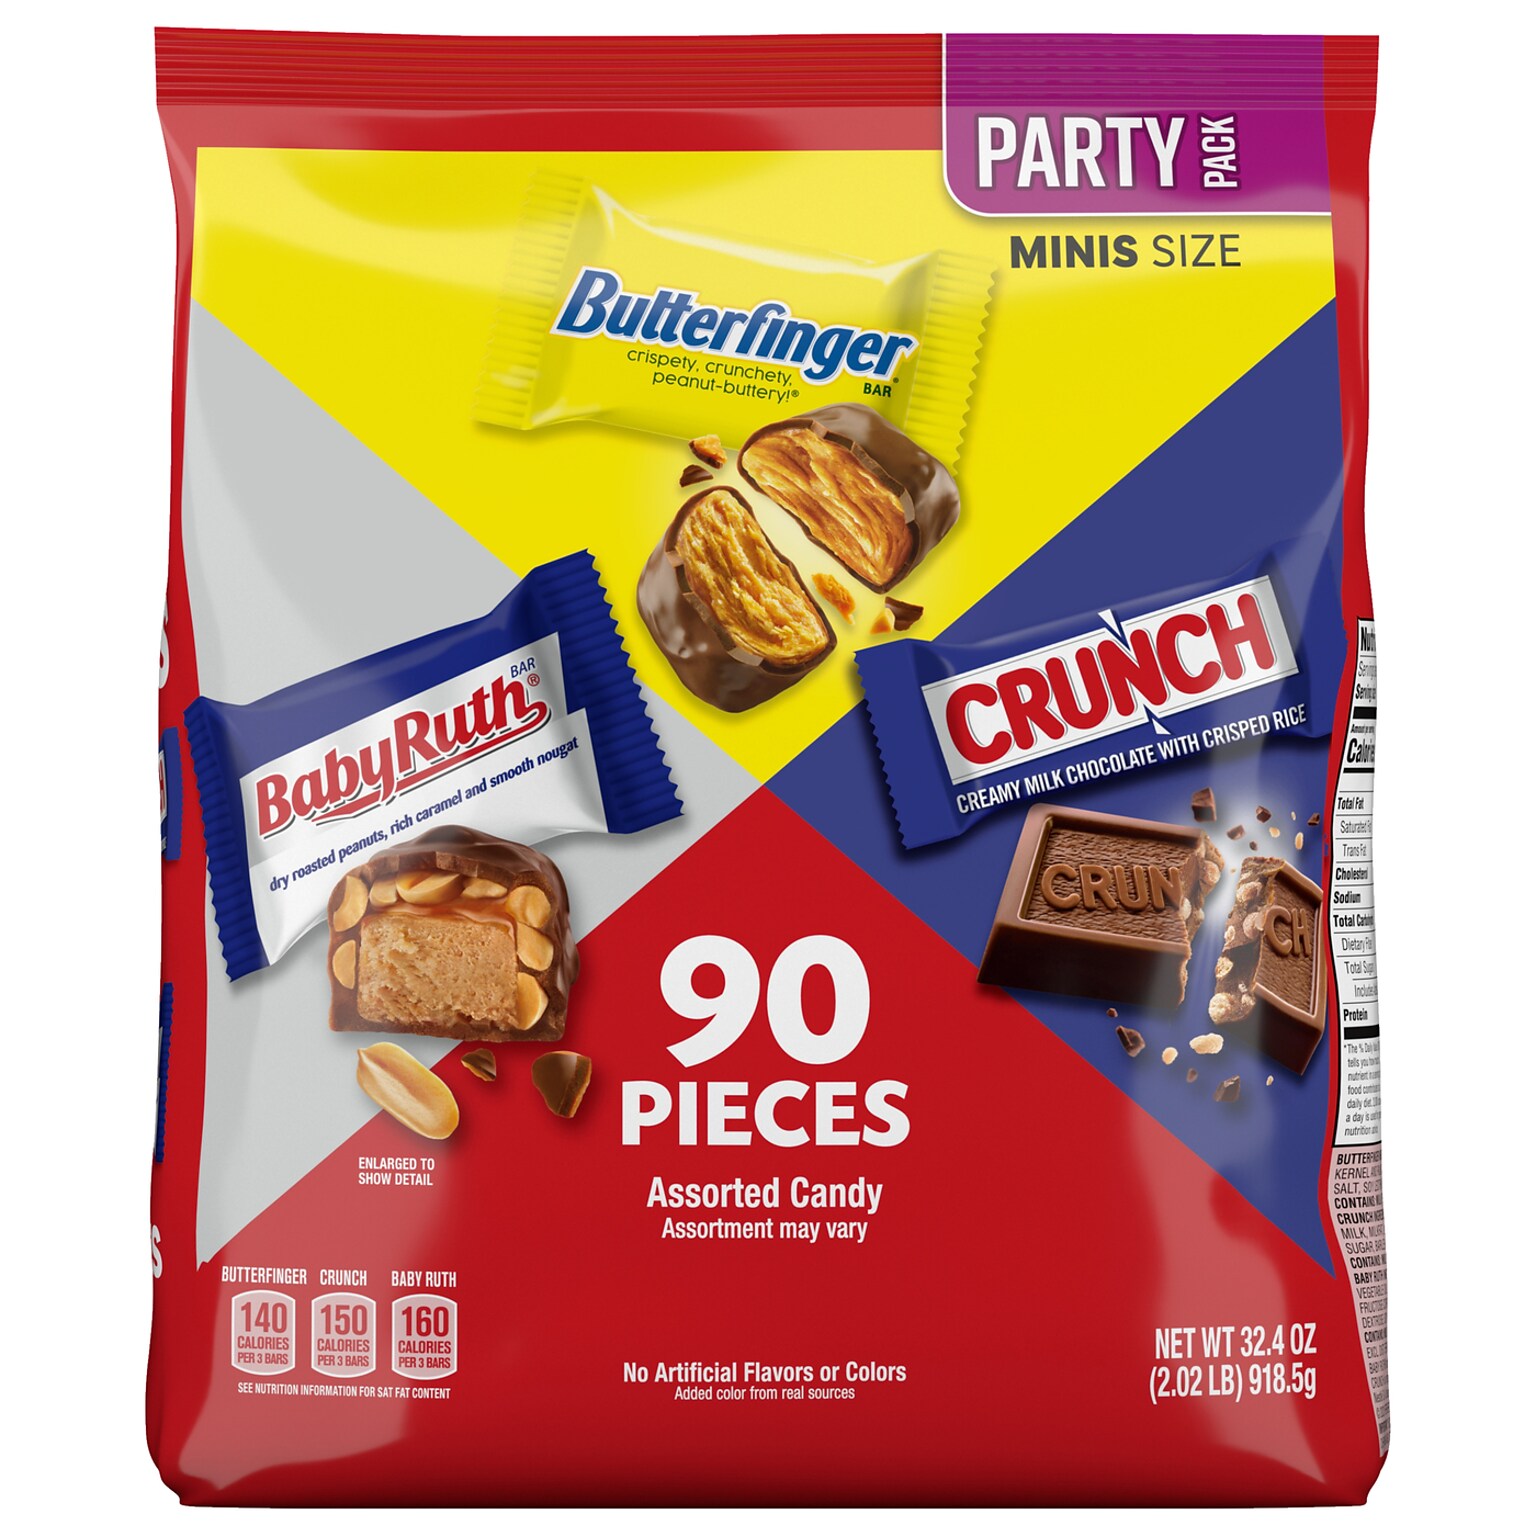 Butterfinger, CRUNCH, and Baby Ruth Assorted Minis Candy Bars, 32.4oz (FEU71526)